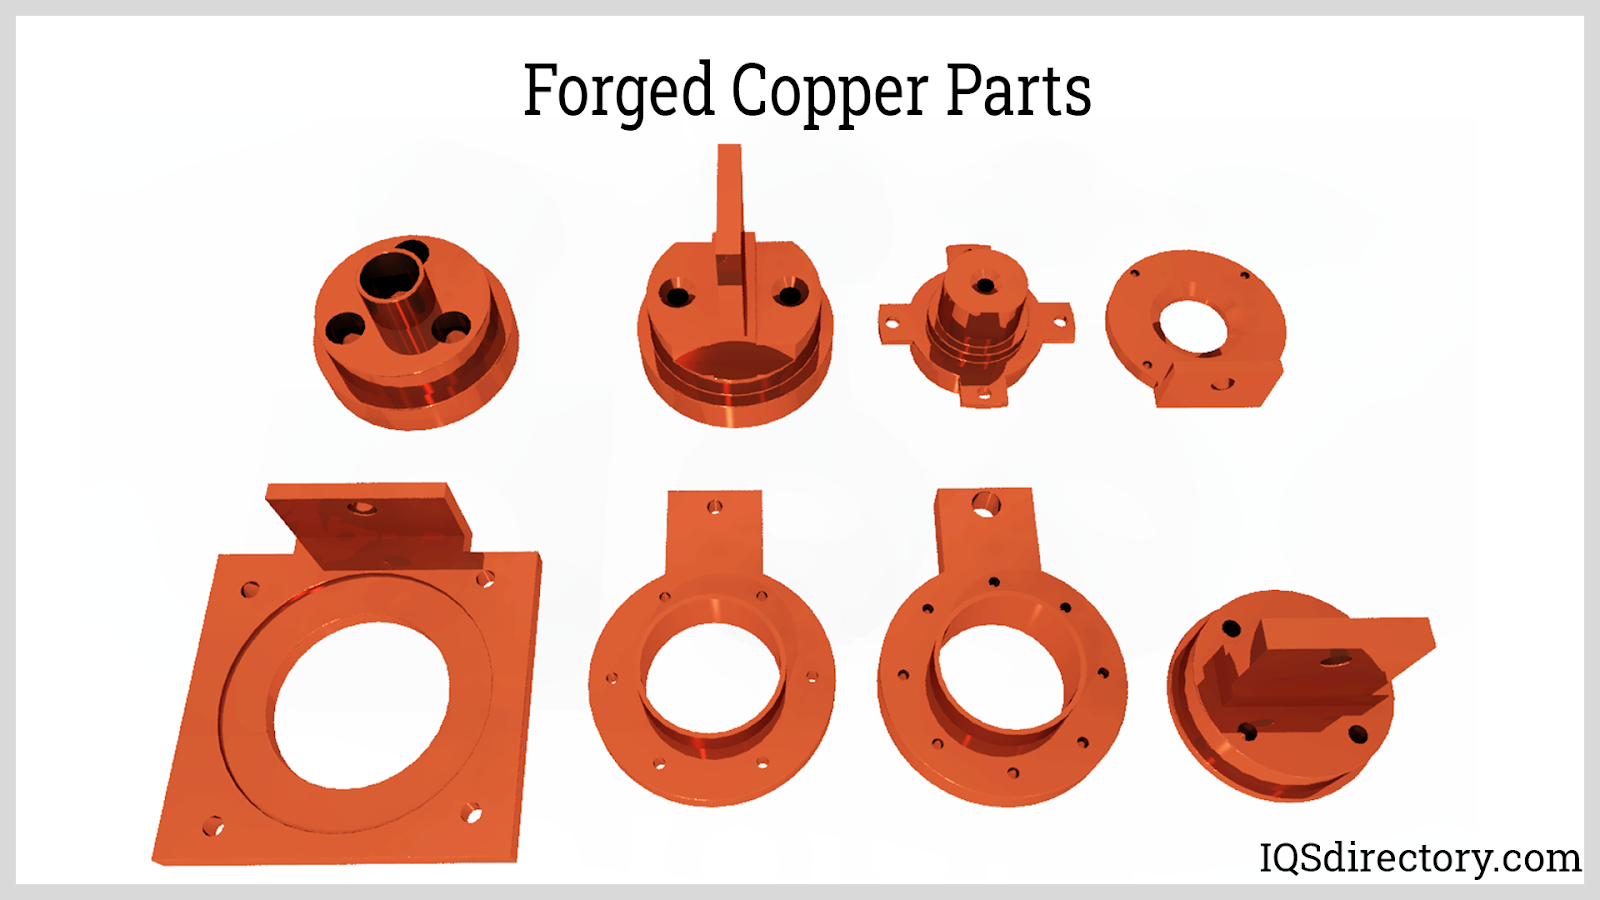 Forged Copper Parts